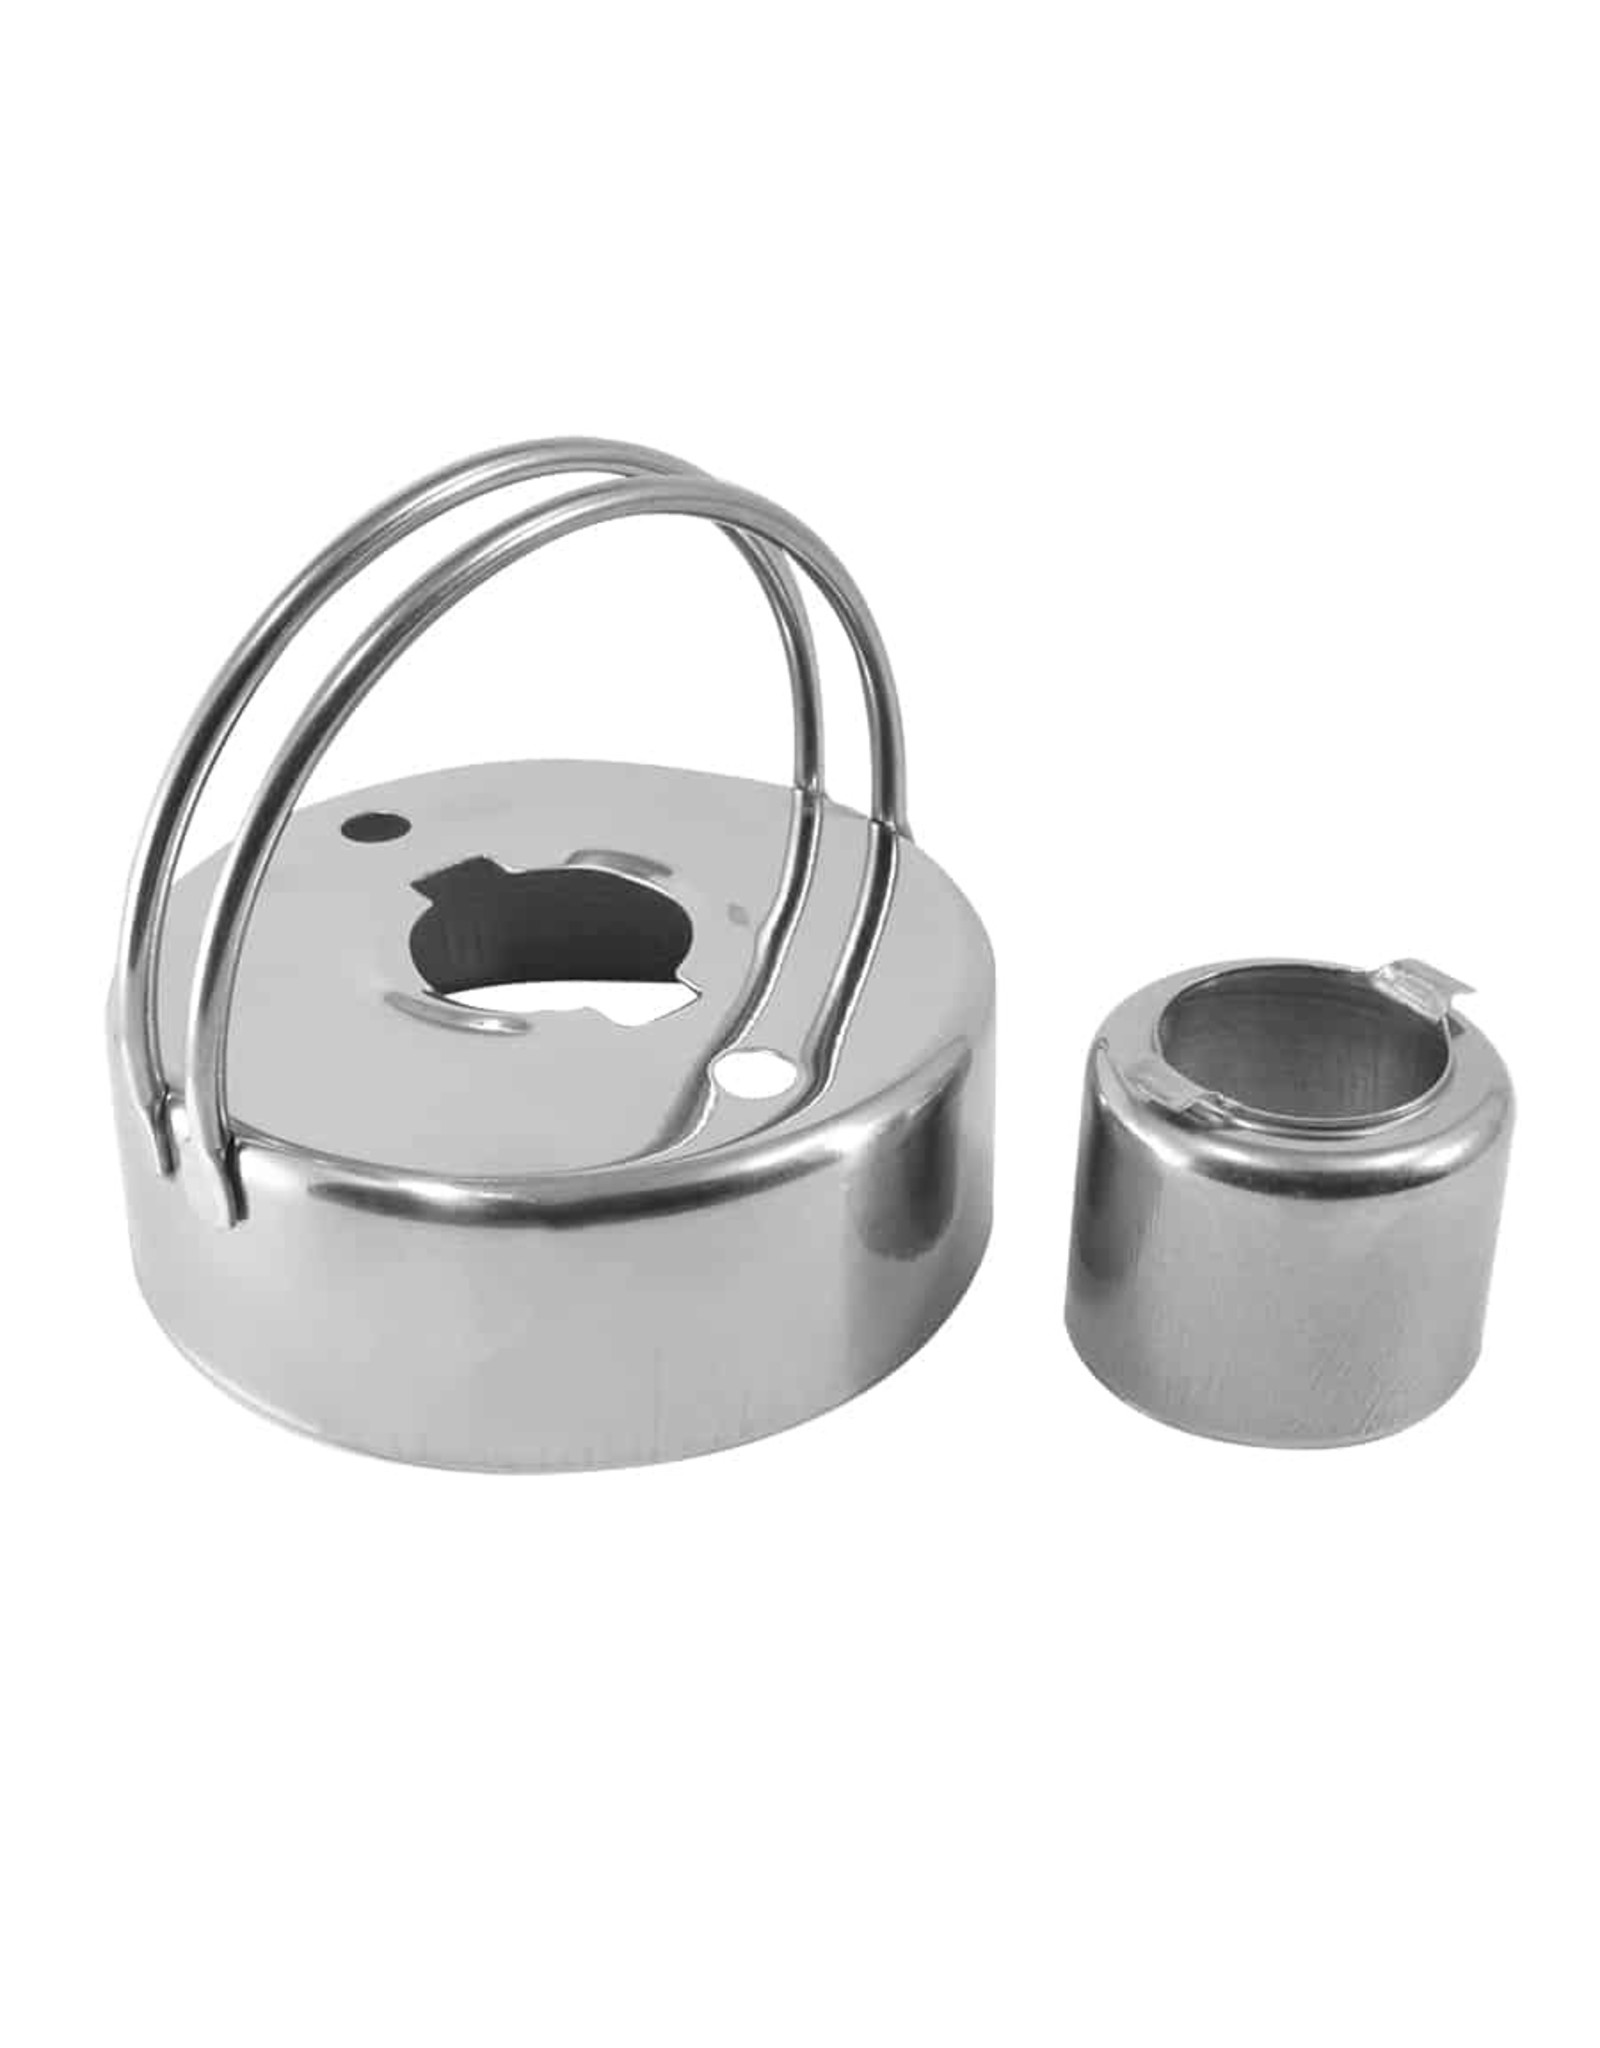 Donut and Biscuit Cutter